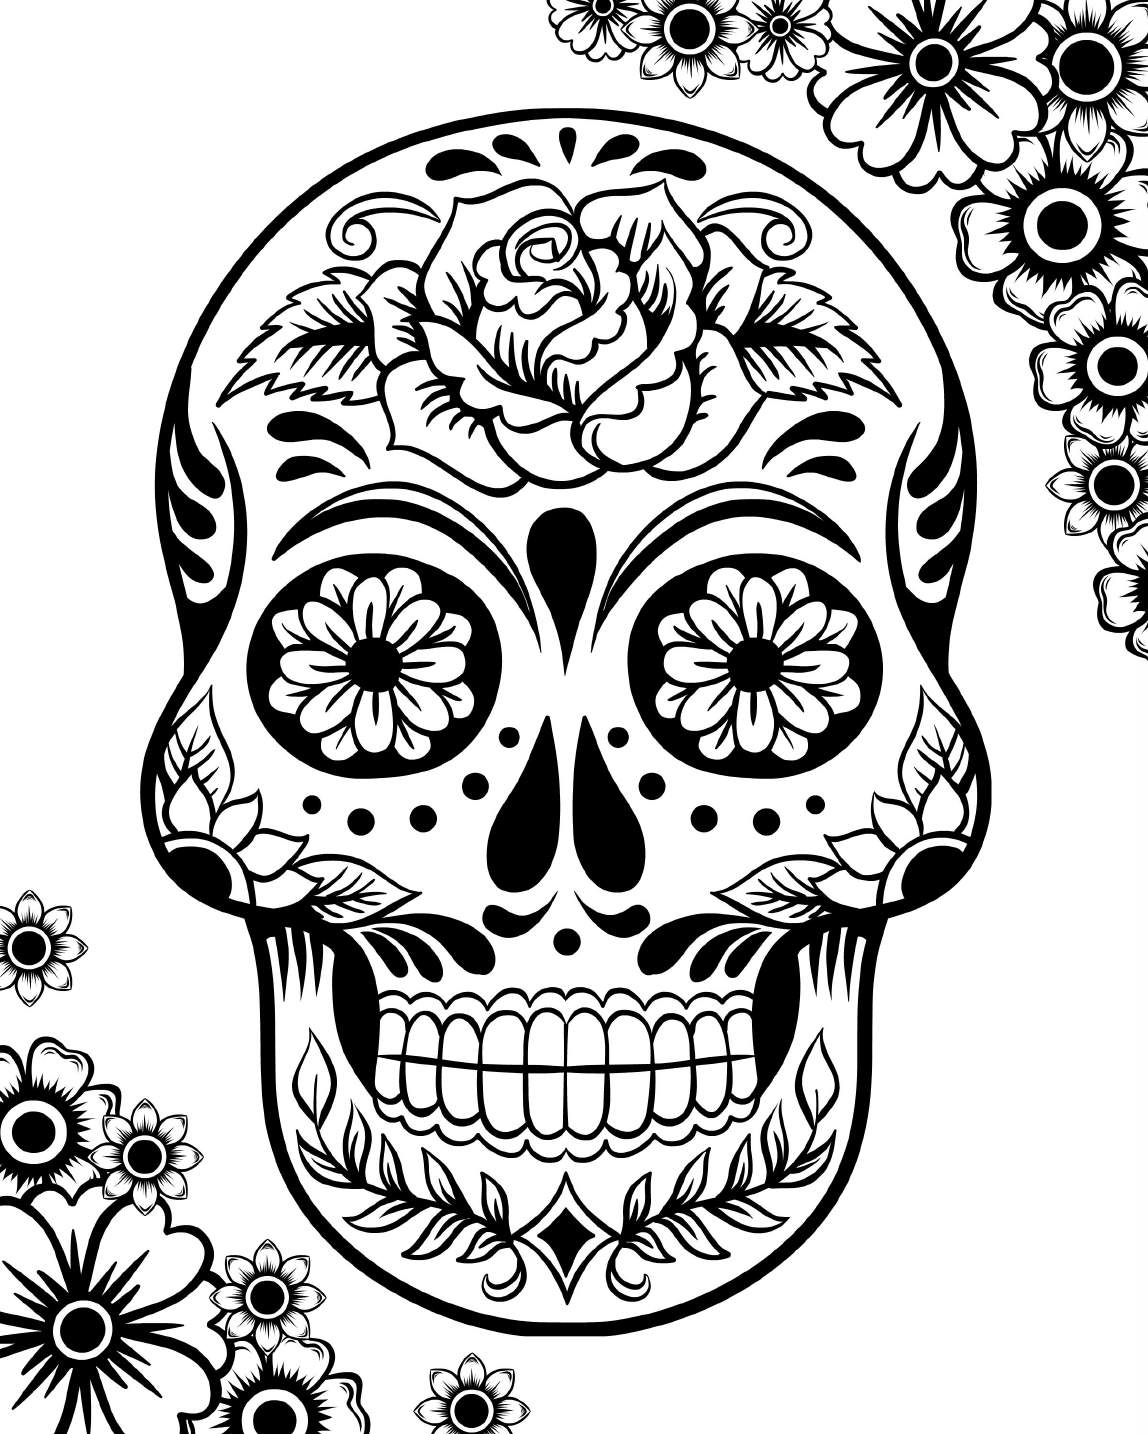 Free Printable Day of the Dead Coloring Pages - Best Coloring Pages For